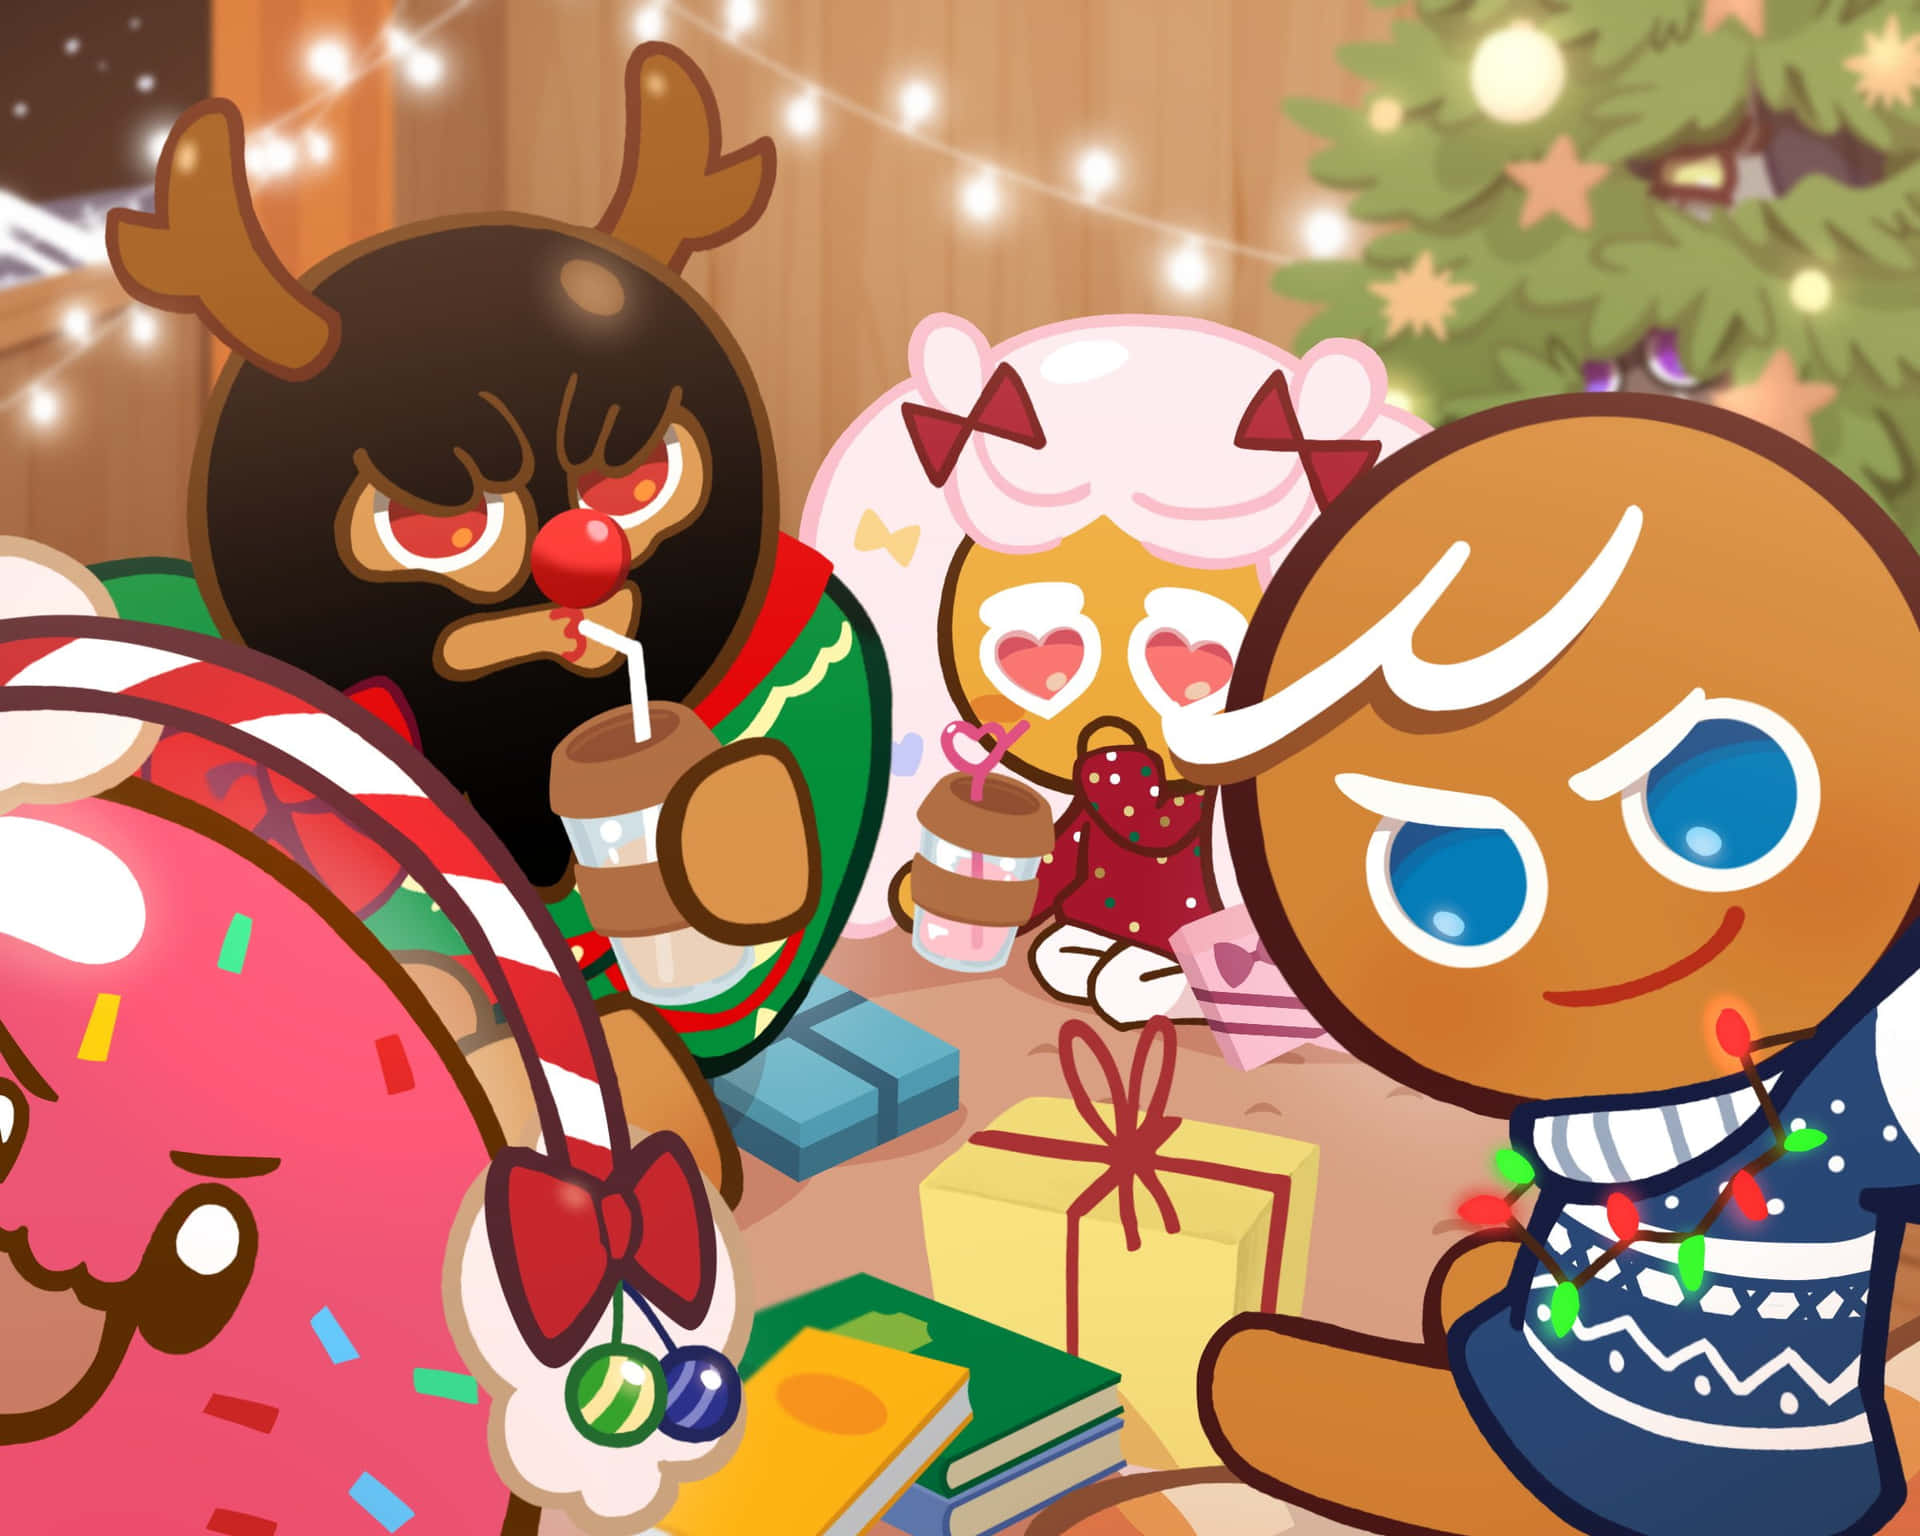 A Group Of Gingerbread Men And Women Sitting Around A Christmas Tree